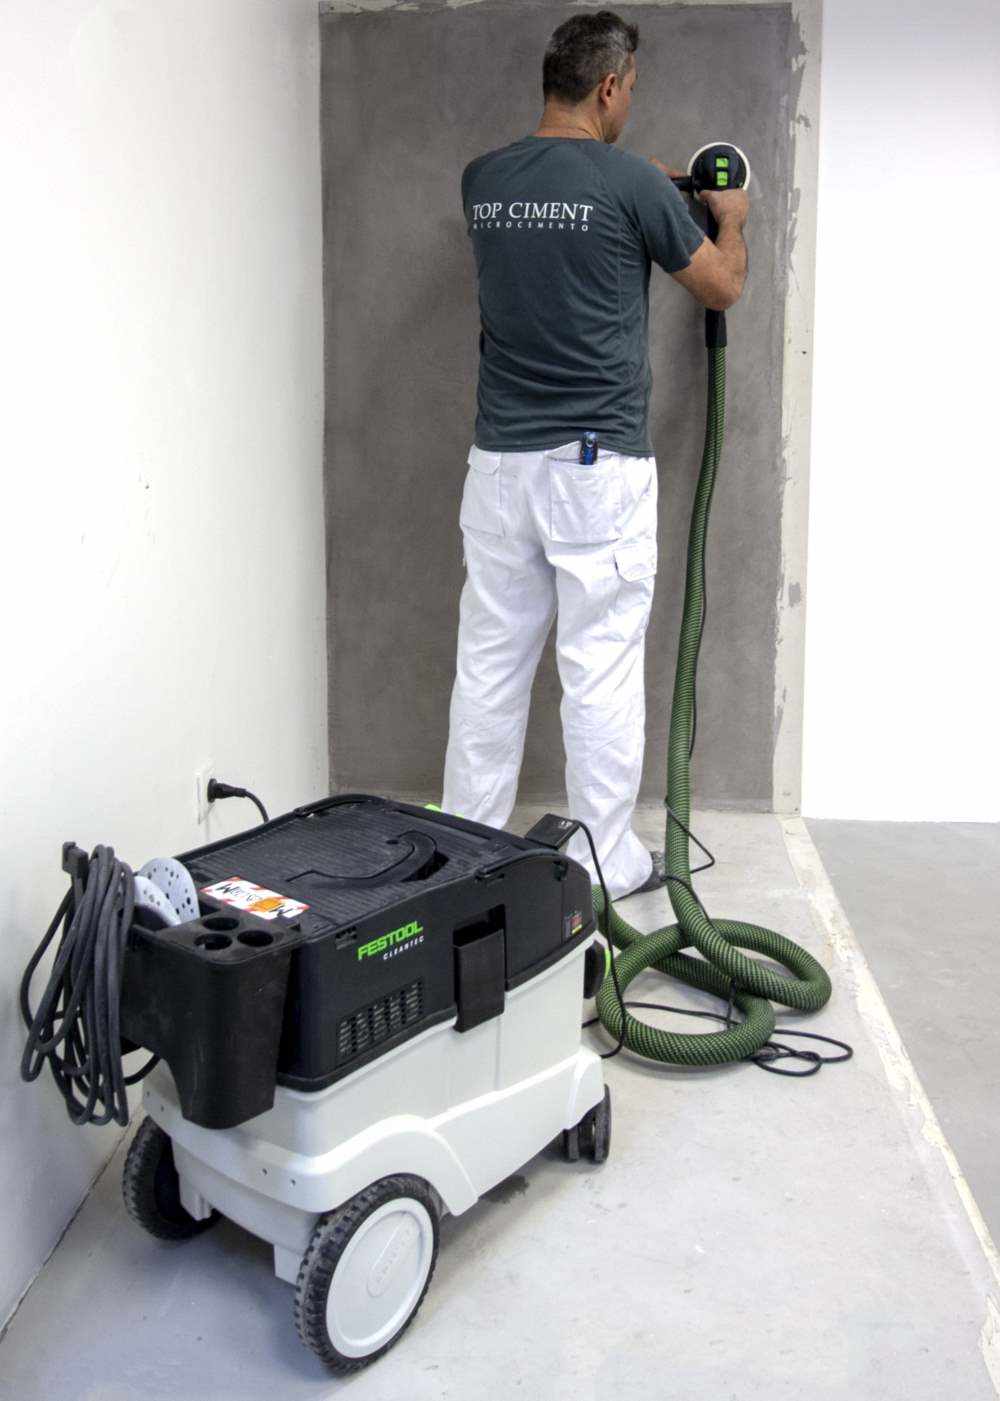 Festool CLEANTEC mobile systemer ideelle for mikrosement